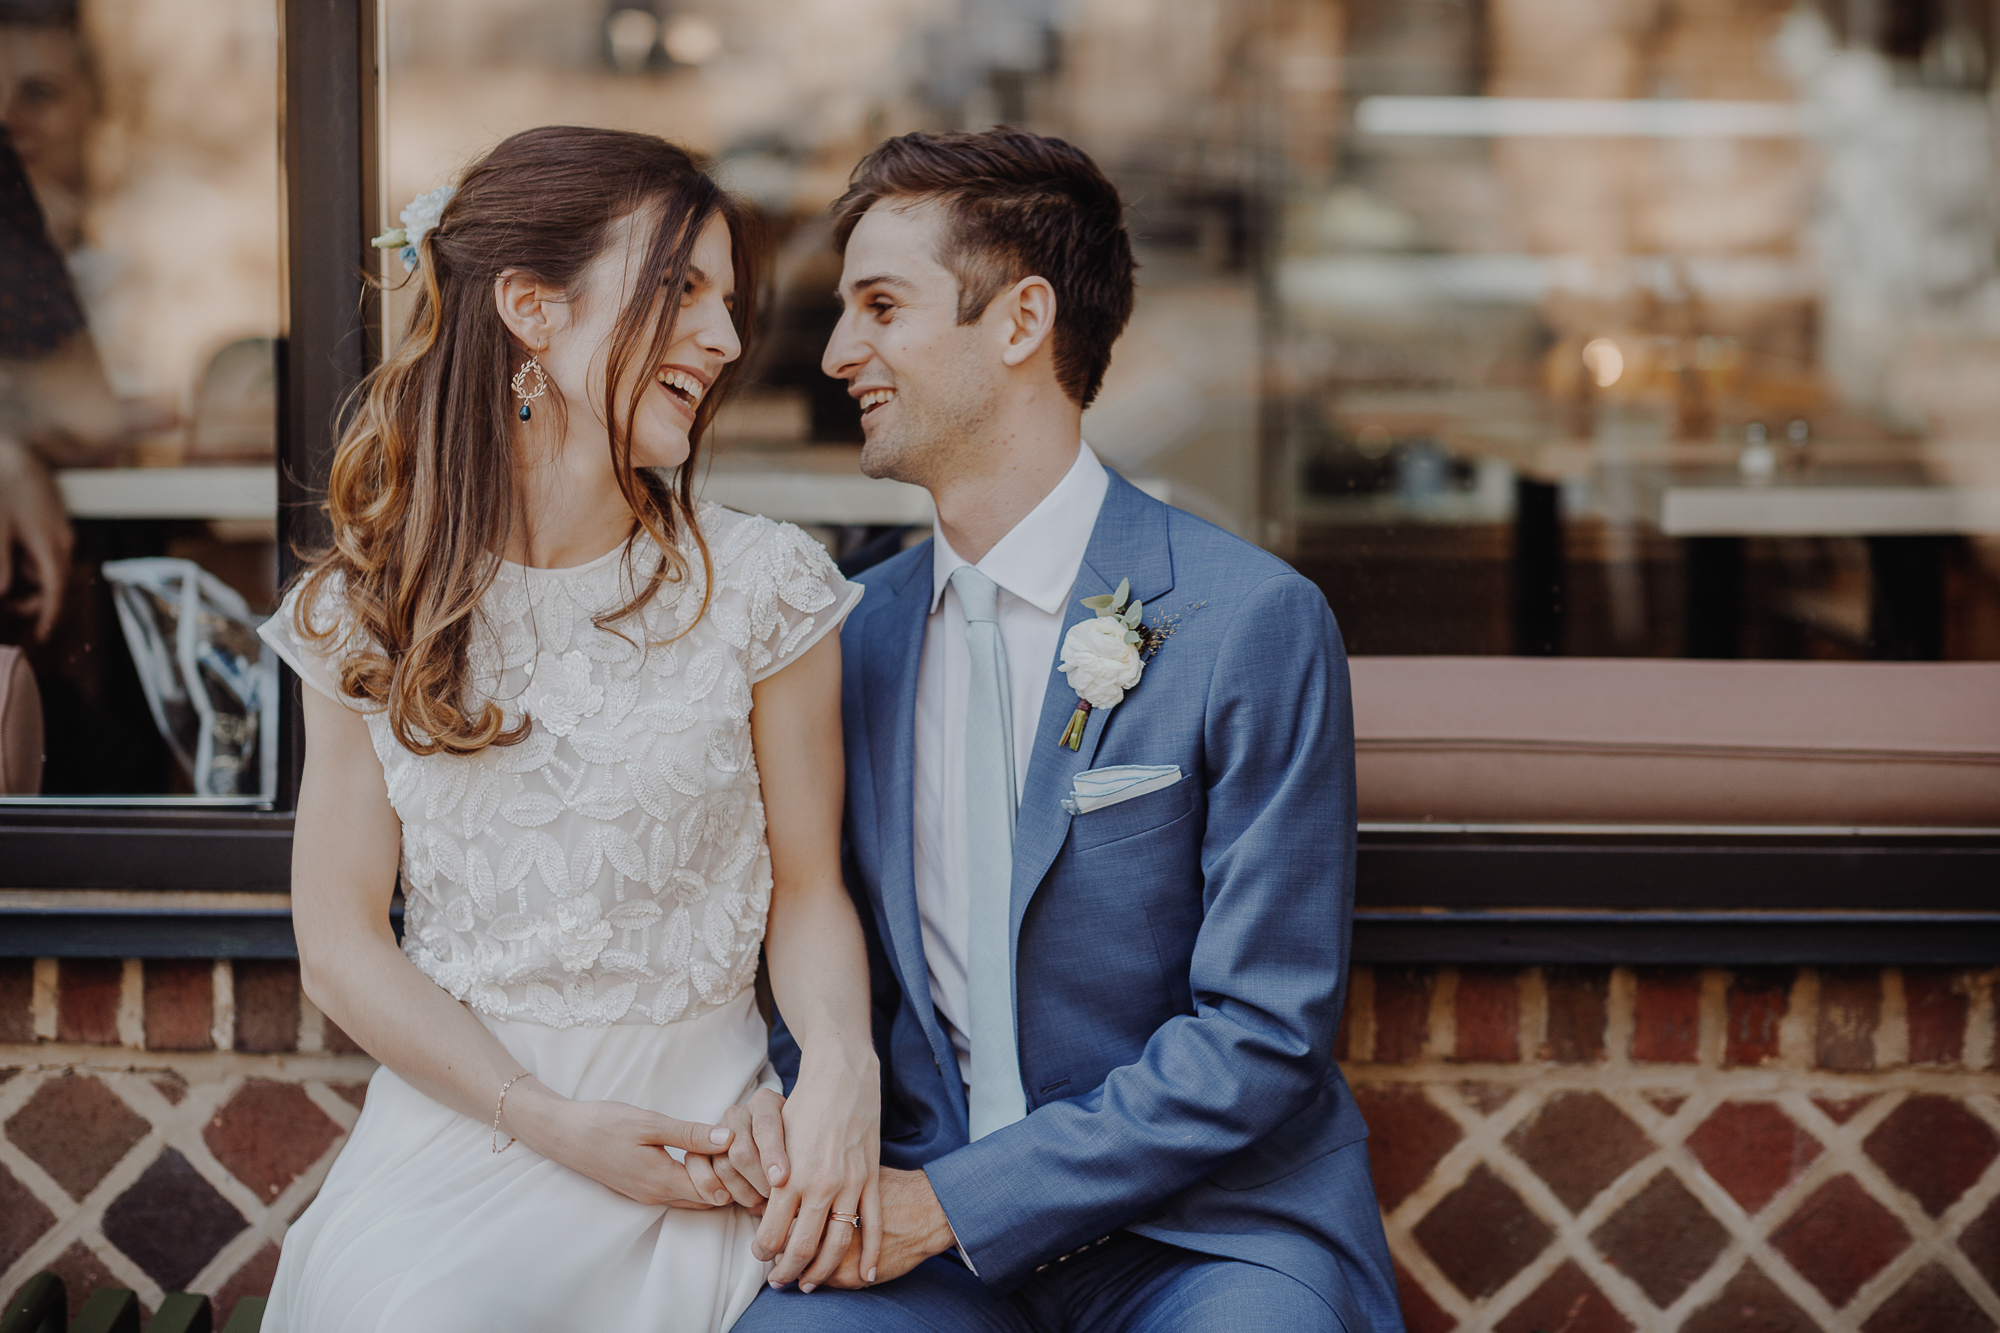 Fun Elopement Photography in NYC